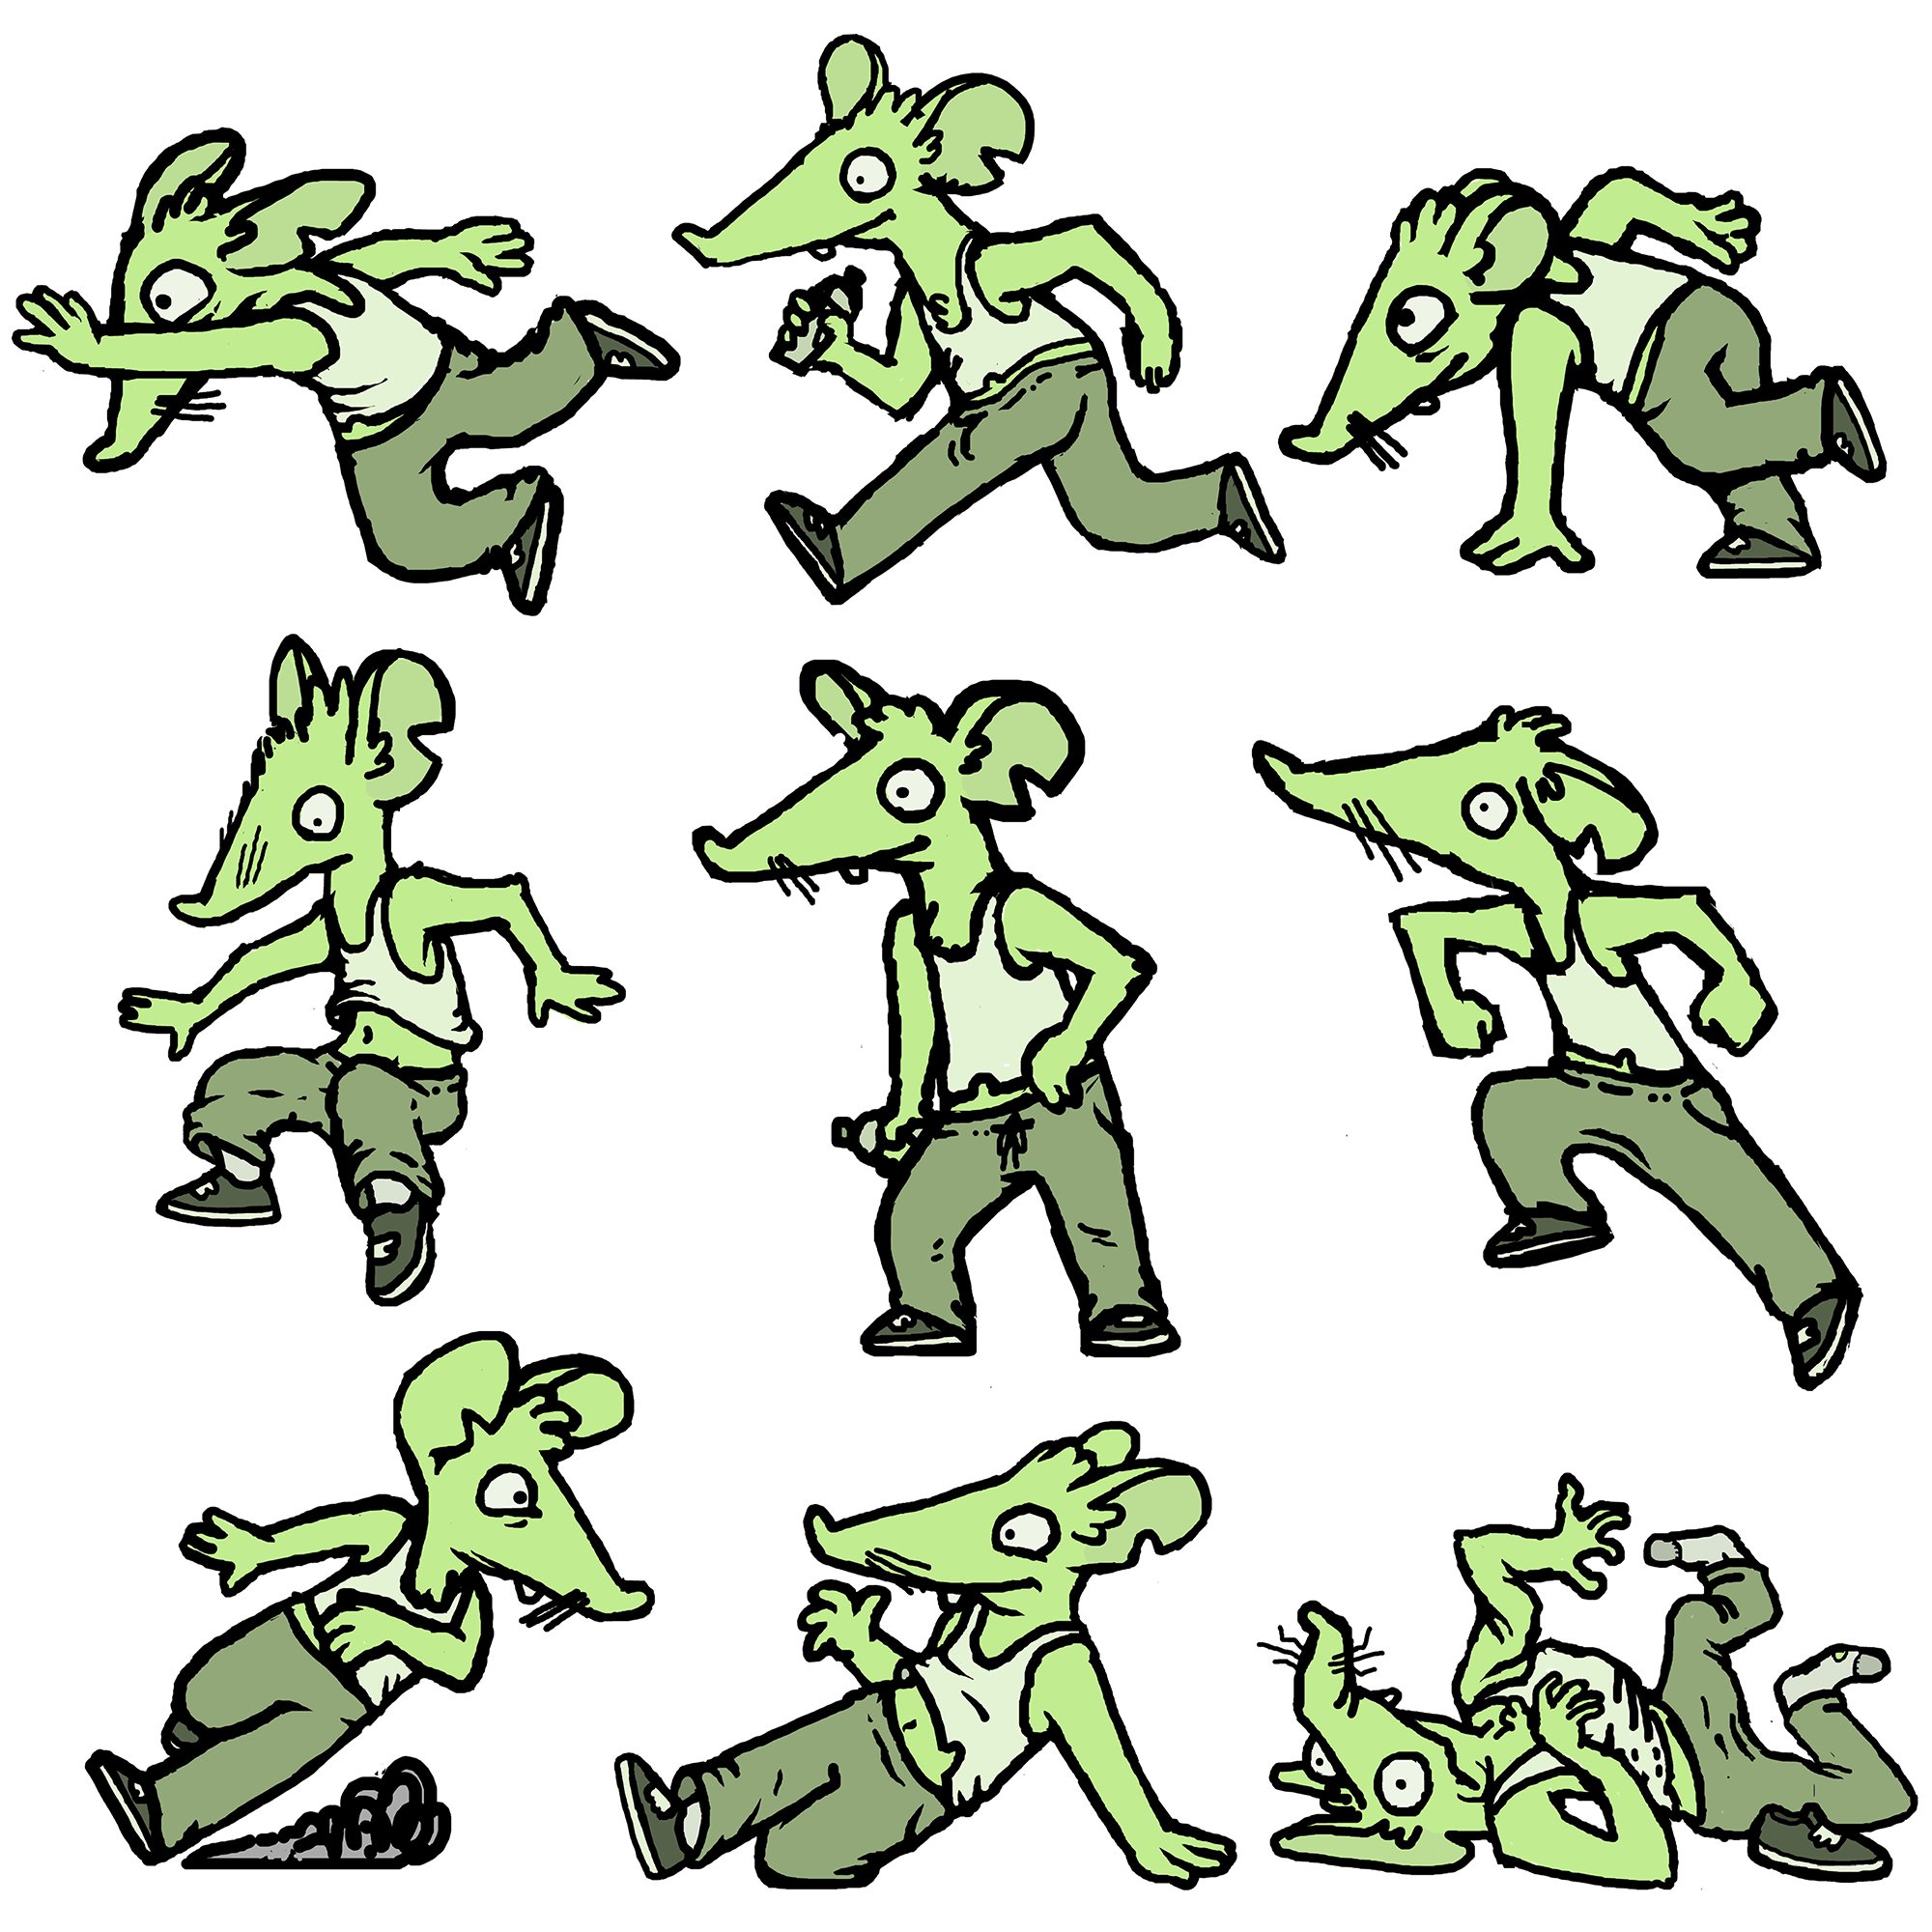 Character Animation Frames for 'Ratbag' Game Concept